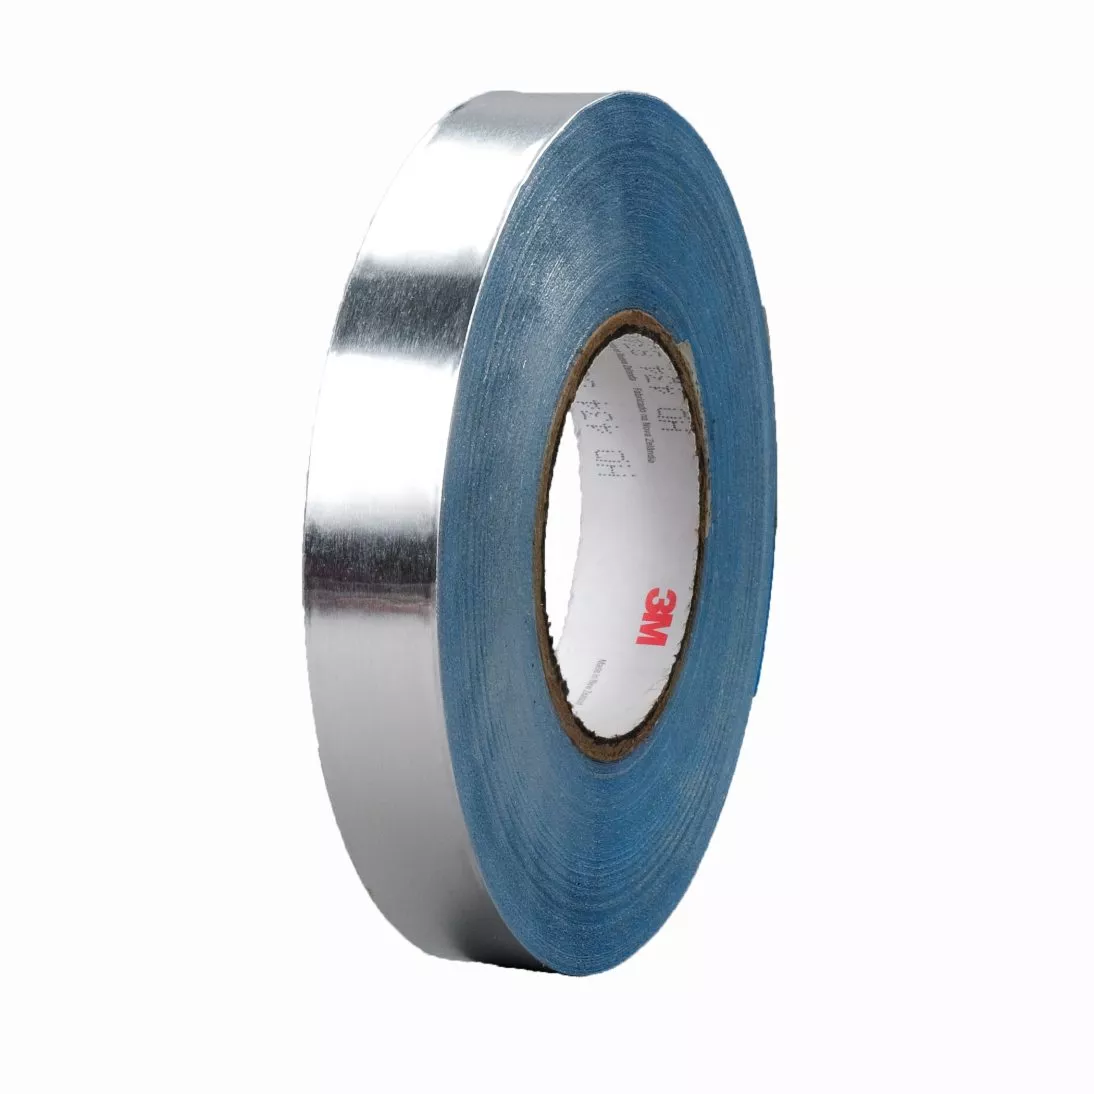 3M™ Vibration Damping Tape 436, Silver, 9 in x 36 yd, 17.5 mil, 1 roll
per case